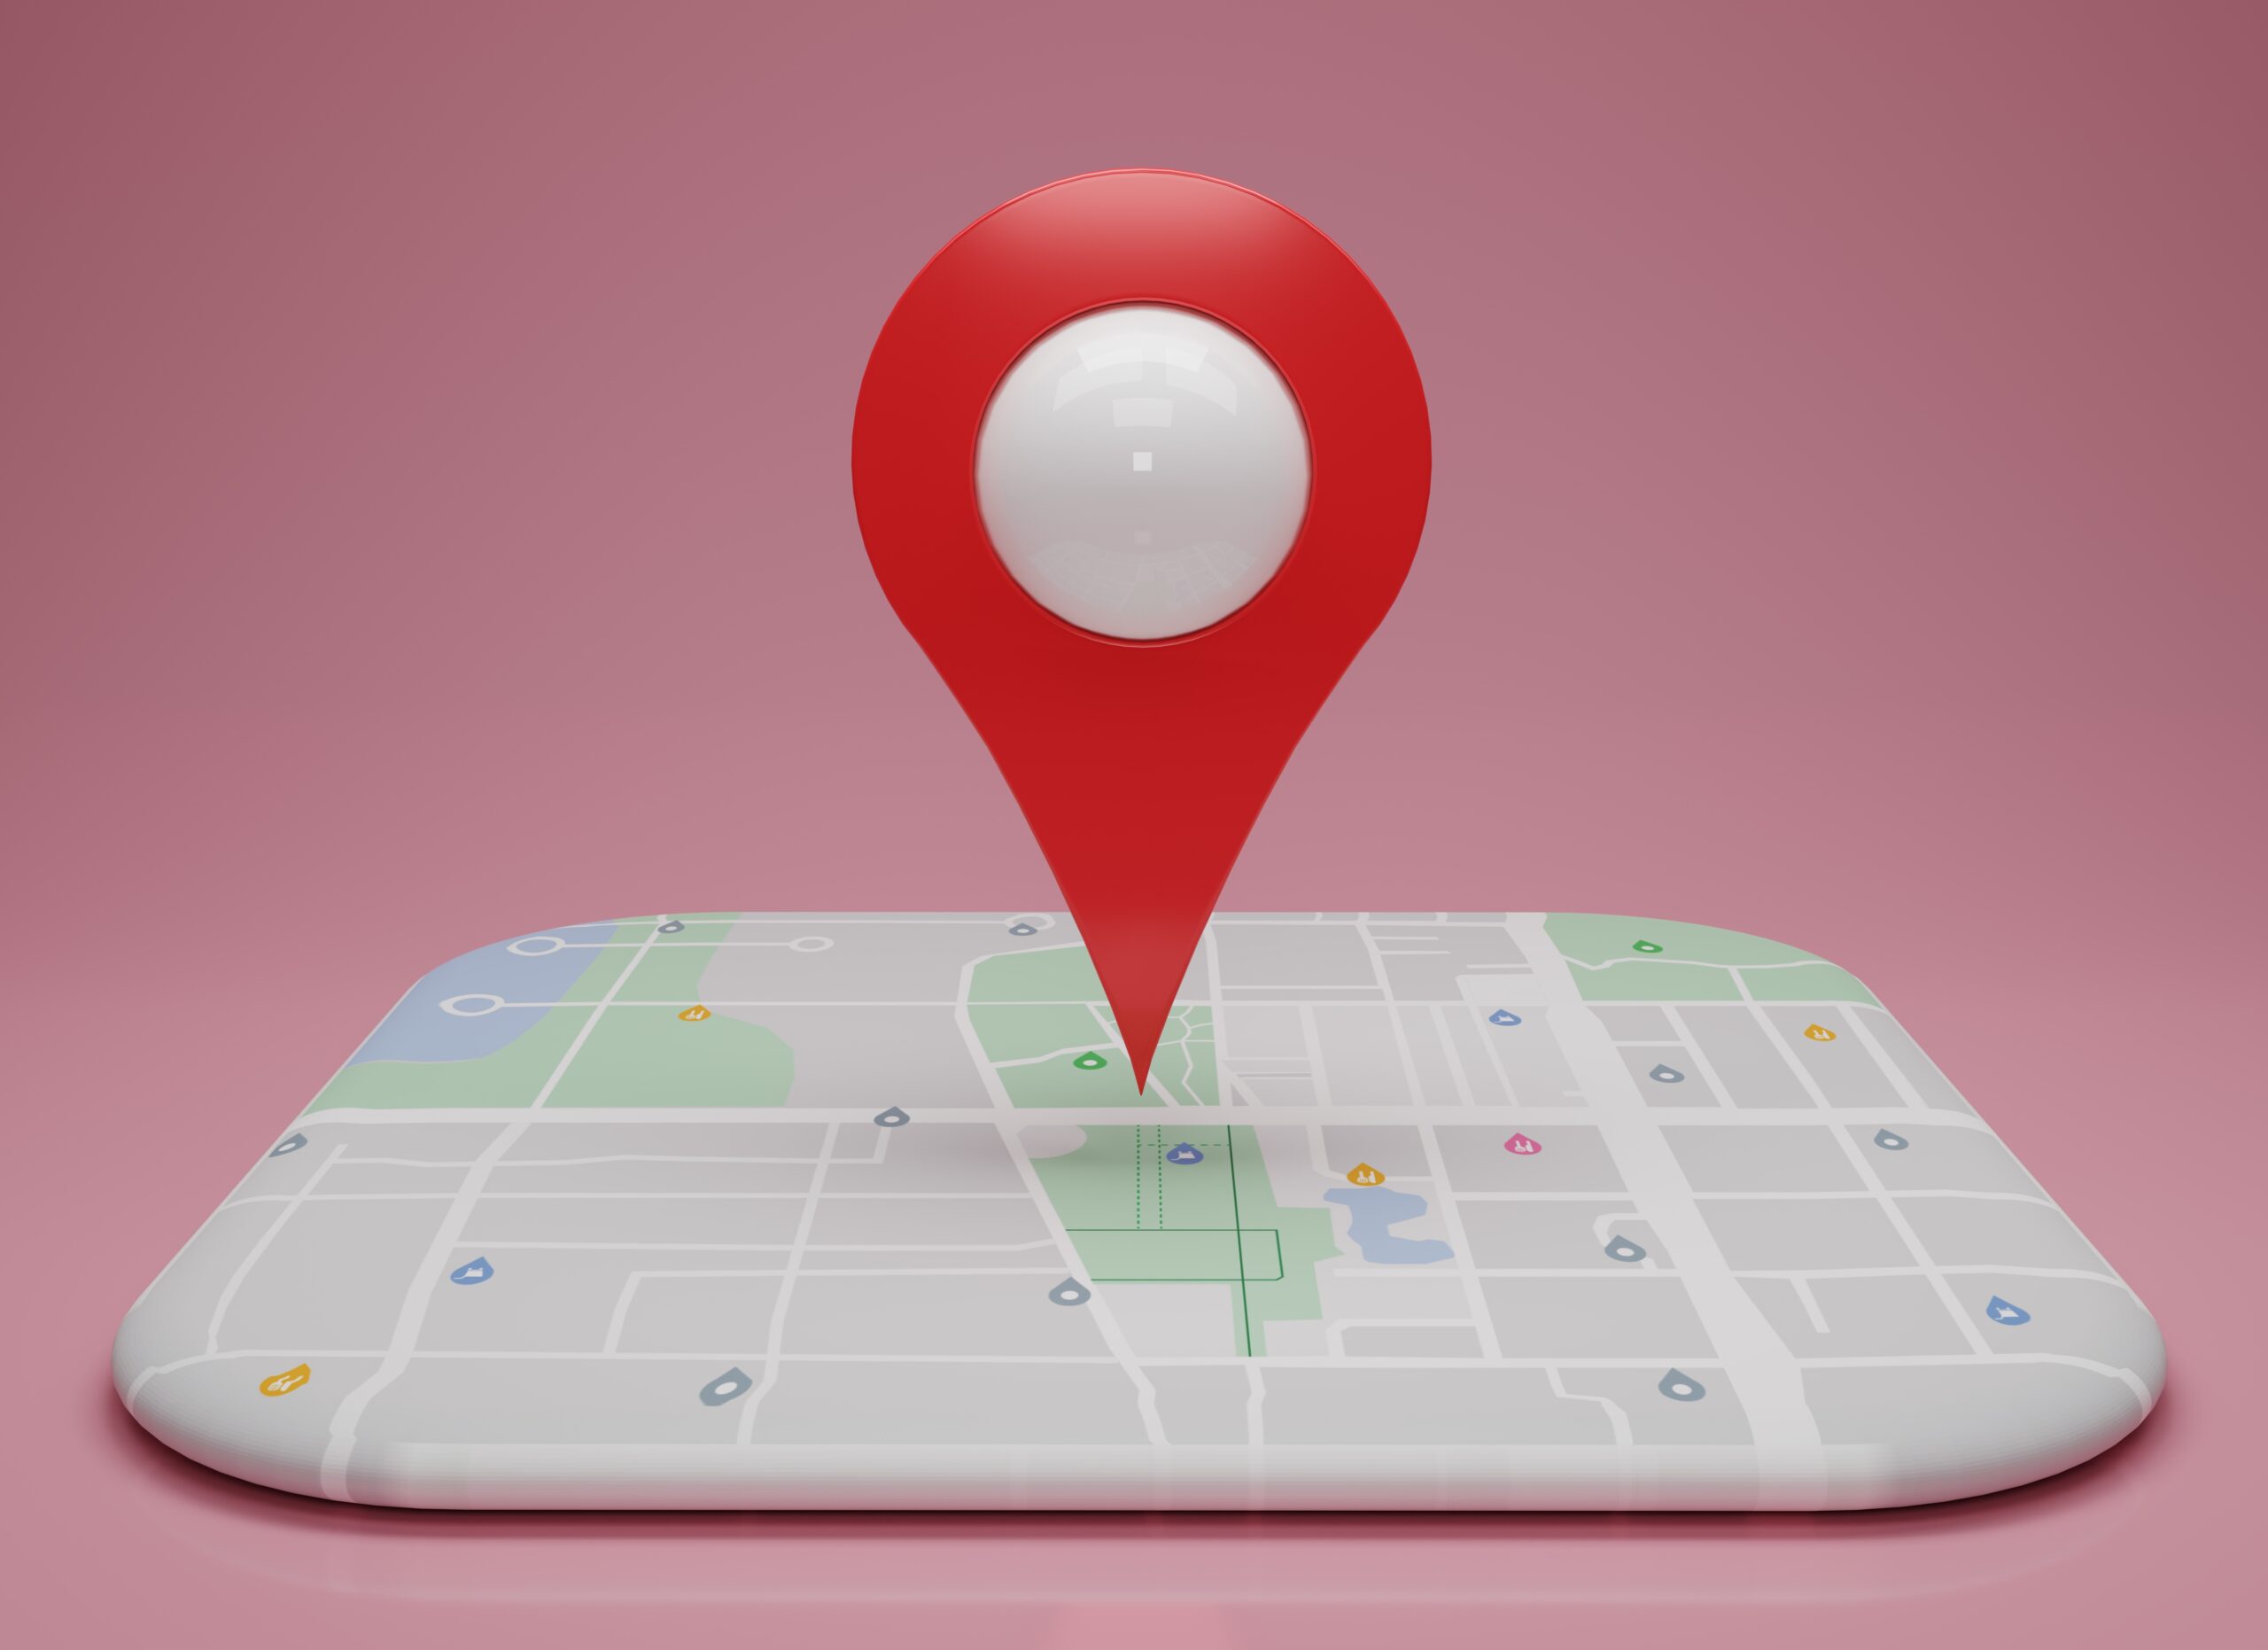 [EASY GUIDE] How to Change Location on Google Chrome?